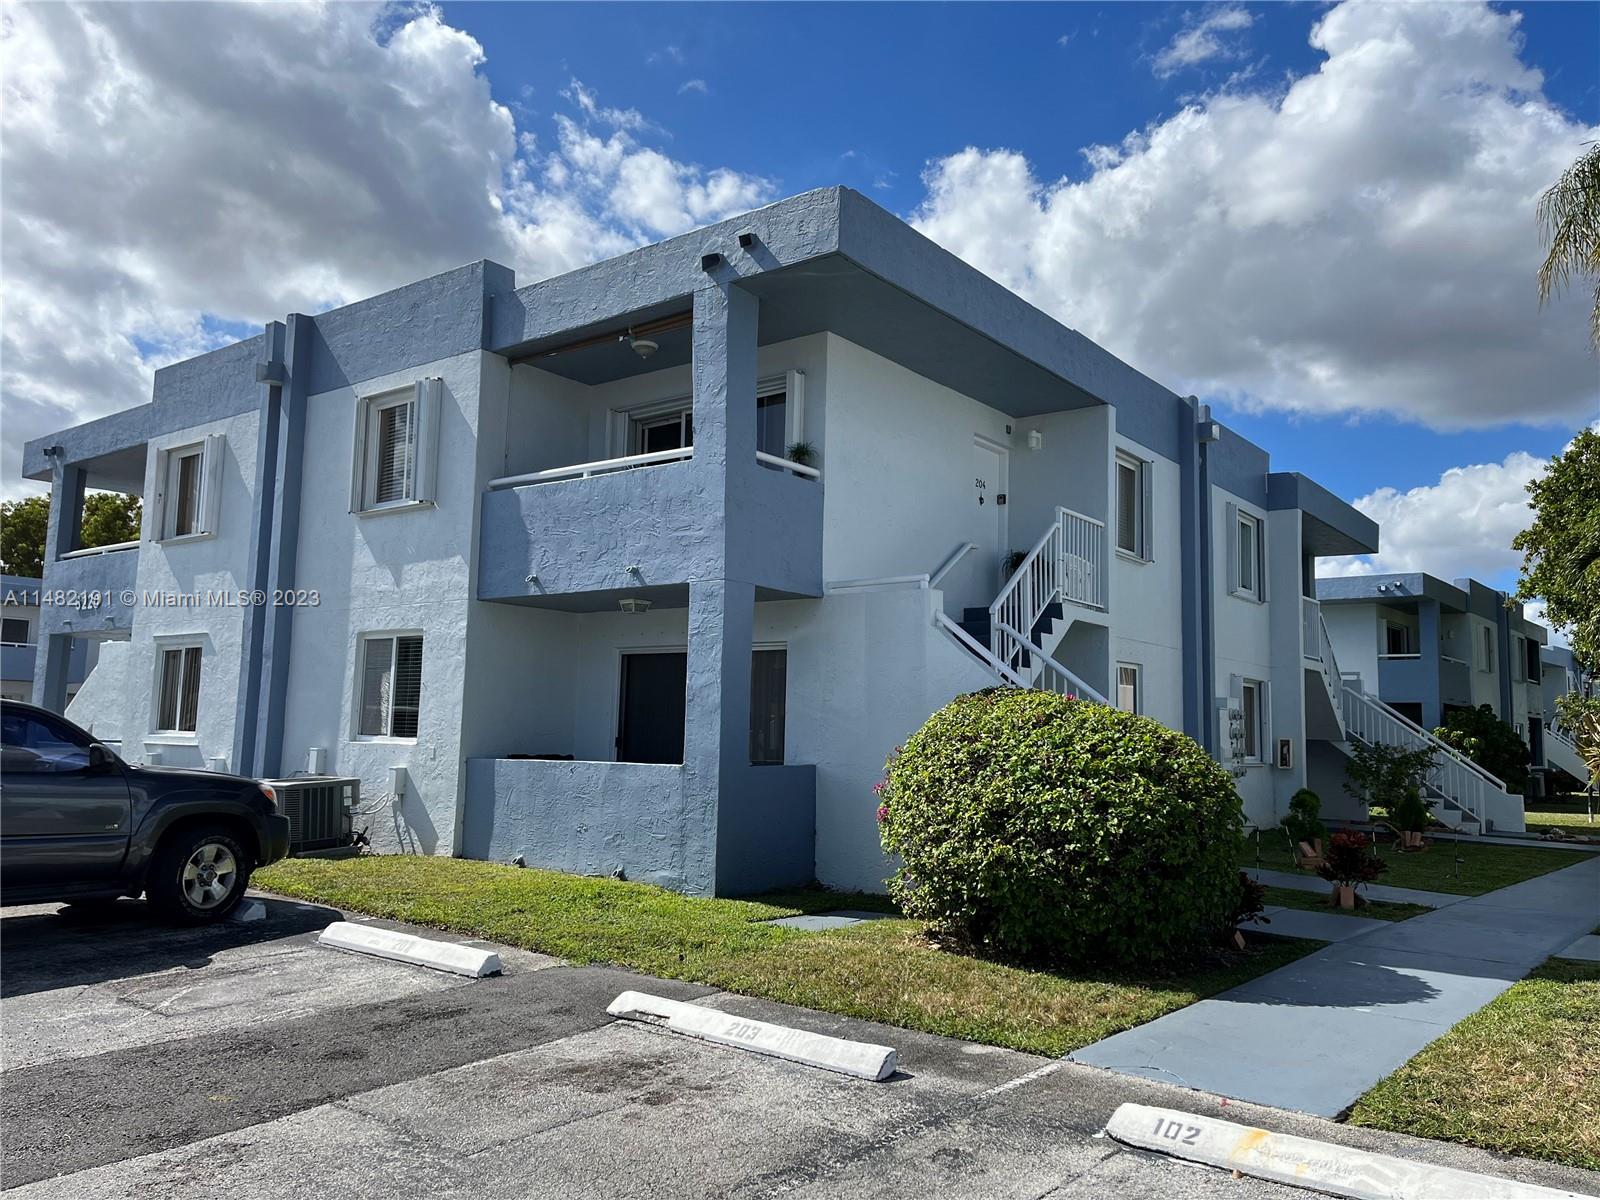 6220 SW 131st Ct 204, Miami, Florida 33183, 1 Bedroom Bedrooms, ,1 BathroomBathrooms,Residential,For Sale,6220 SW 131st Ct 204,A11482191